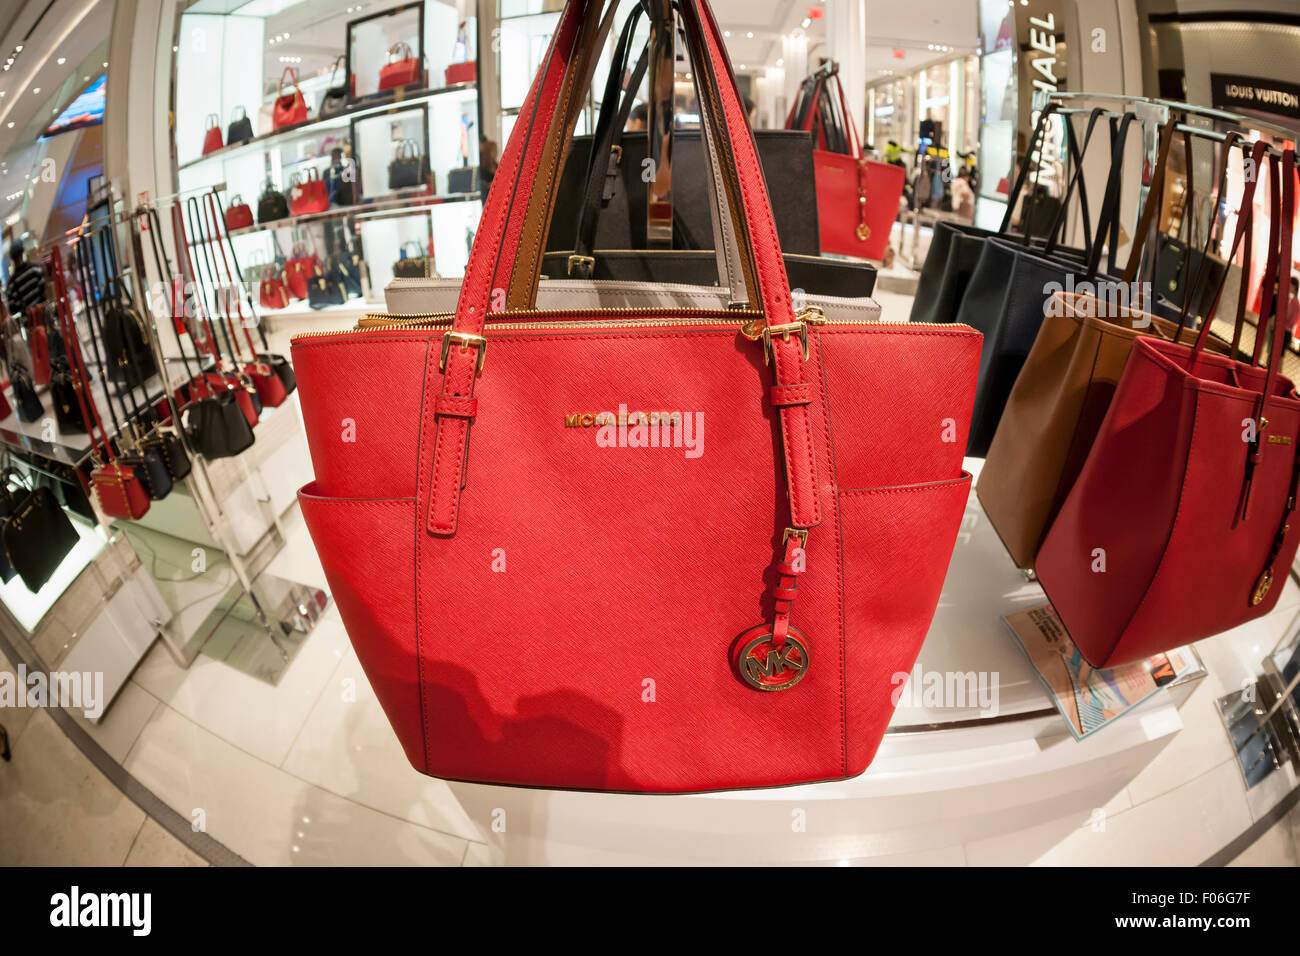 Handbags on display at the Michael Kors boutique within Macy's in New York  on Tuesday, August 4, 2015. First-quarter sales and profits for Michael  Kors handbag designer beat analysts' expectations, albeit low,